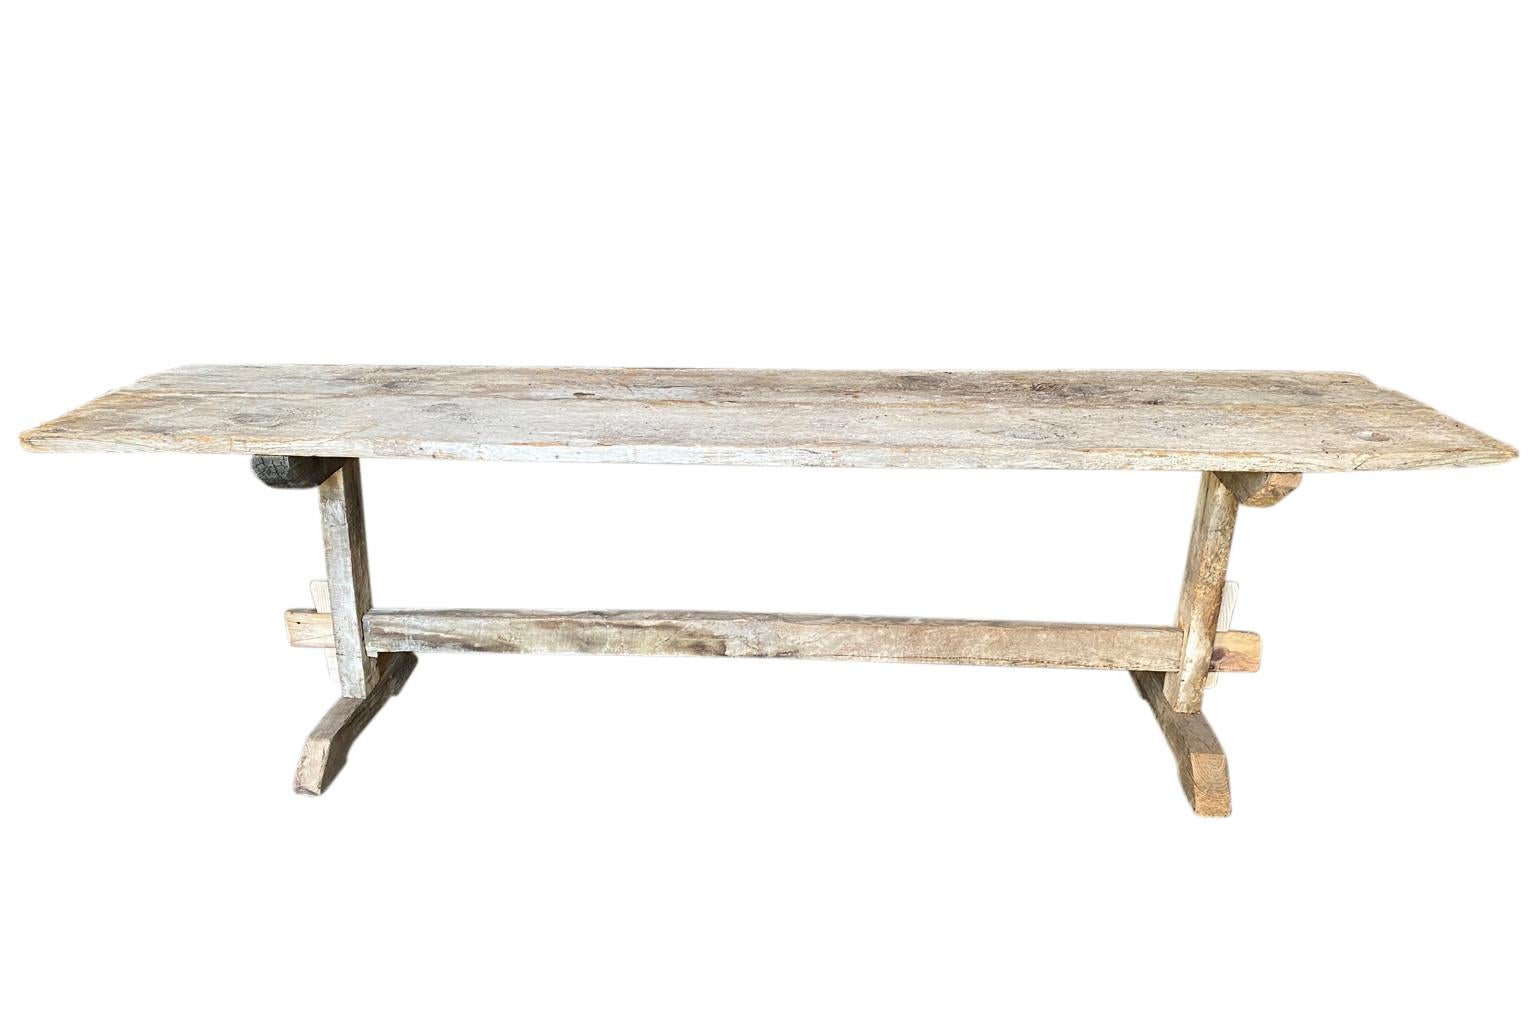 A primitive 18th century console table - trestle table from the Catalan region of Spain.  Soundly constructed from naturally washed pine.  Wonderful patina.  Perfect for a rustic or a modern environment. 